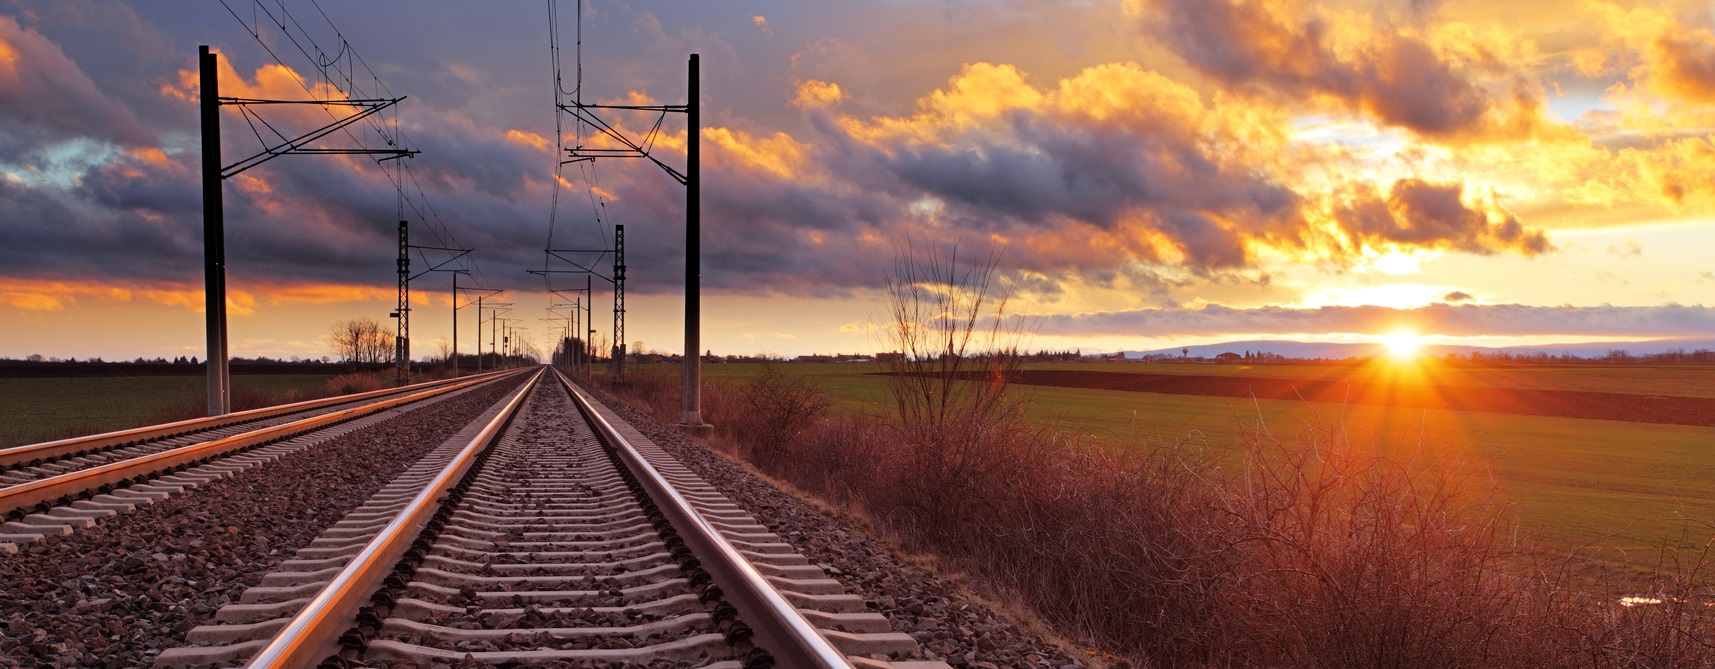 Expertise Saves Day | train tracks | Cost Control Associates